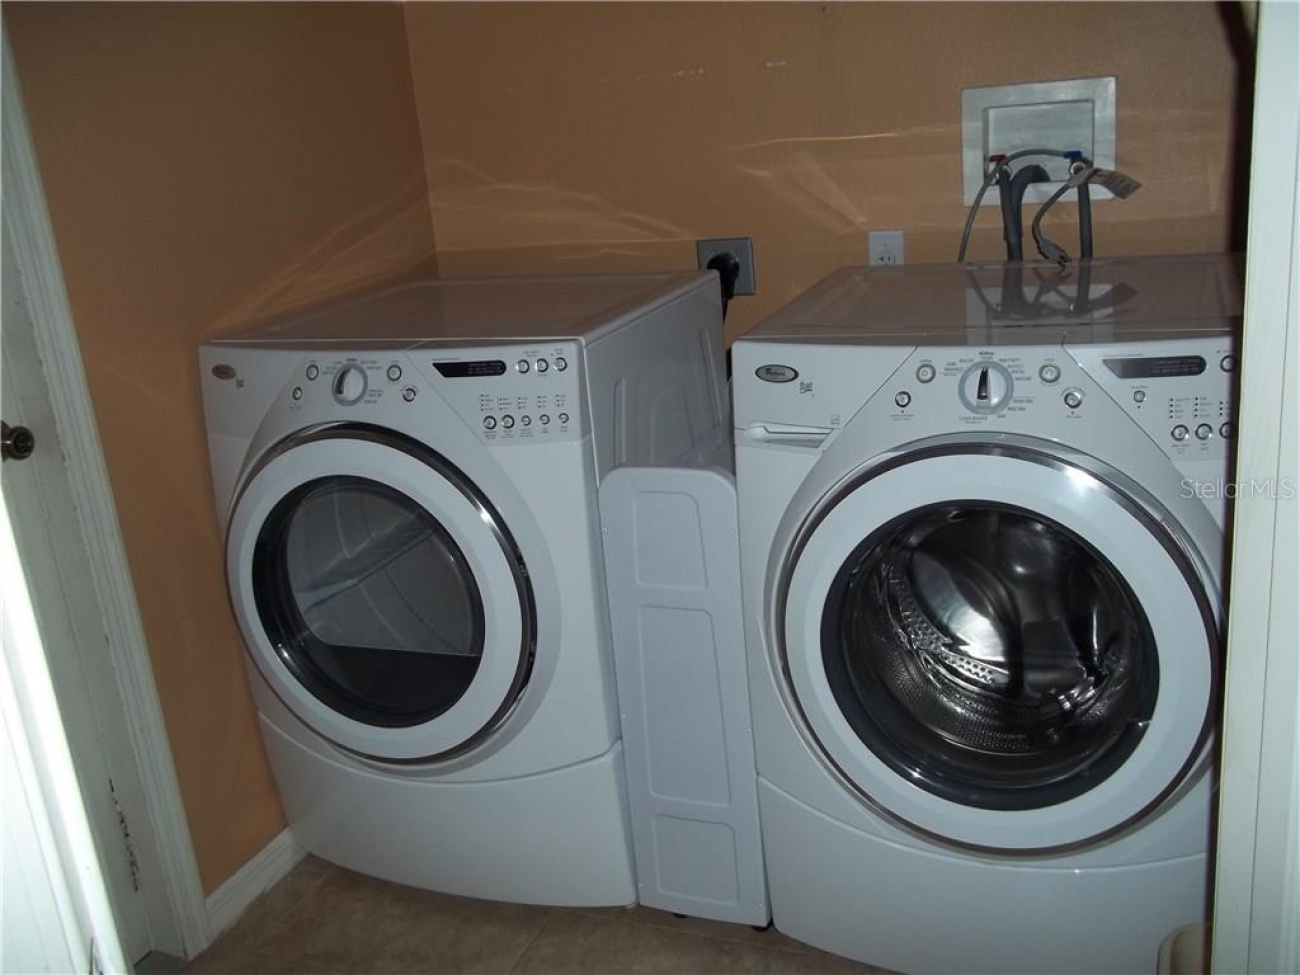 The property provides an indoor laundry room with a washer and dryer.